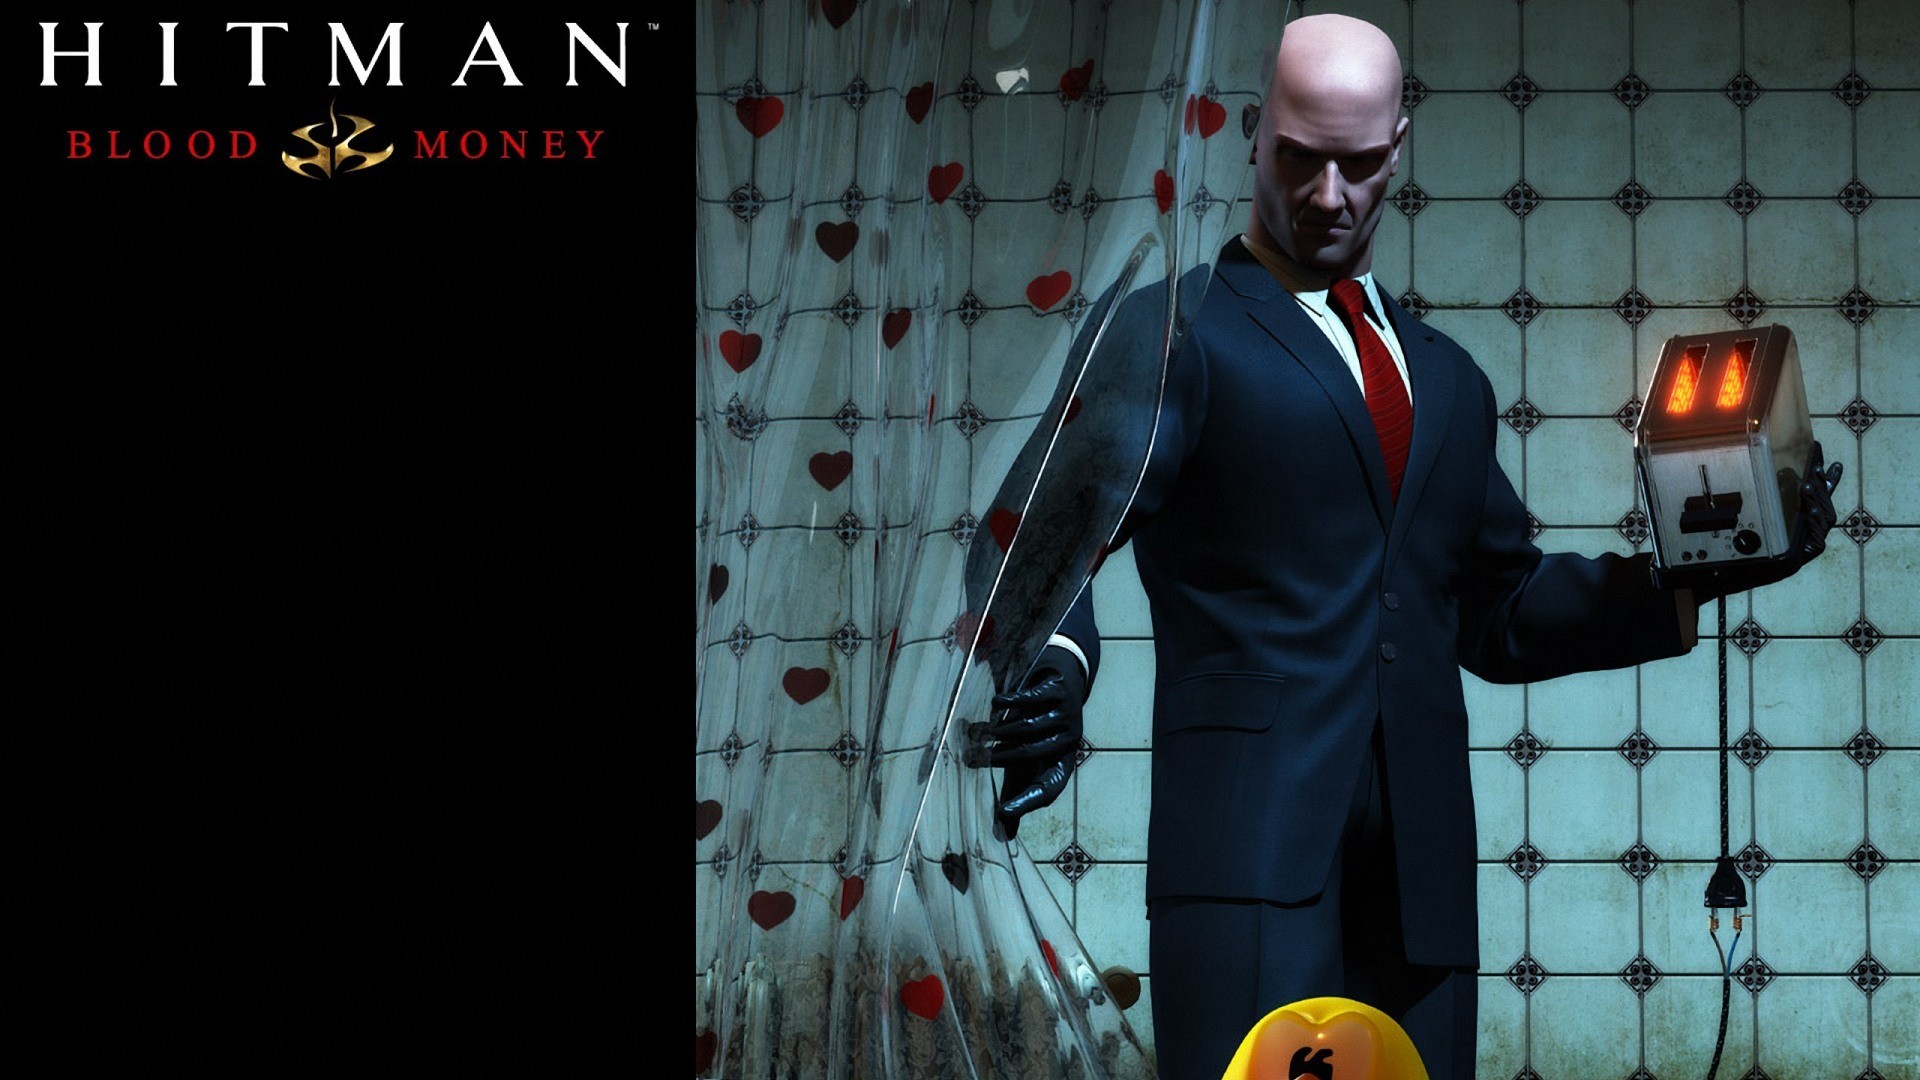 1920x1080 ... Wallpaper Abyss Images of 1680x1050 Hitman Blood Money - #SC ...